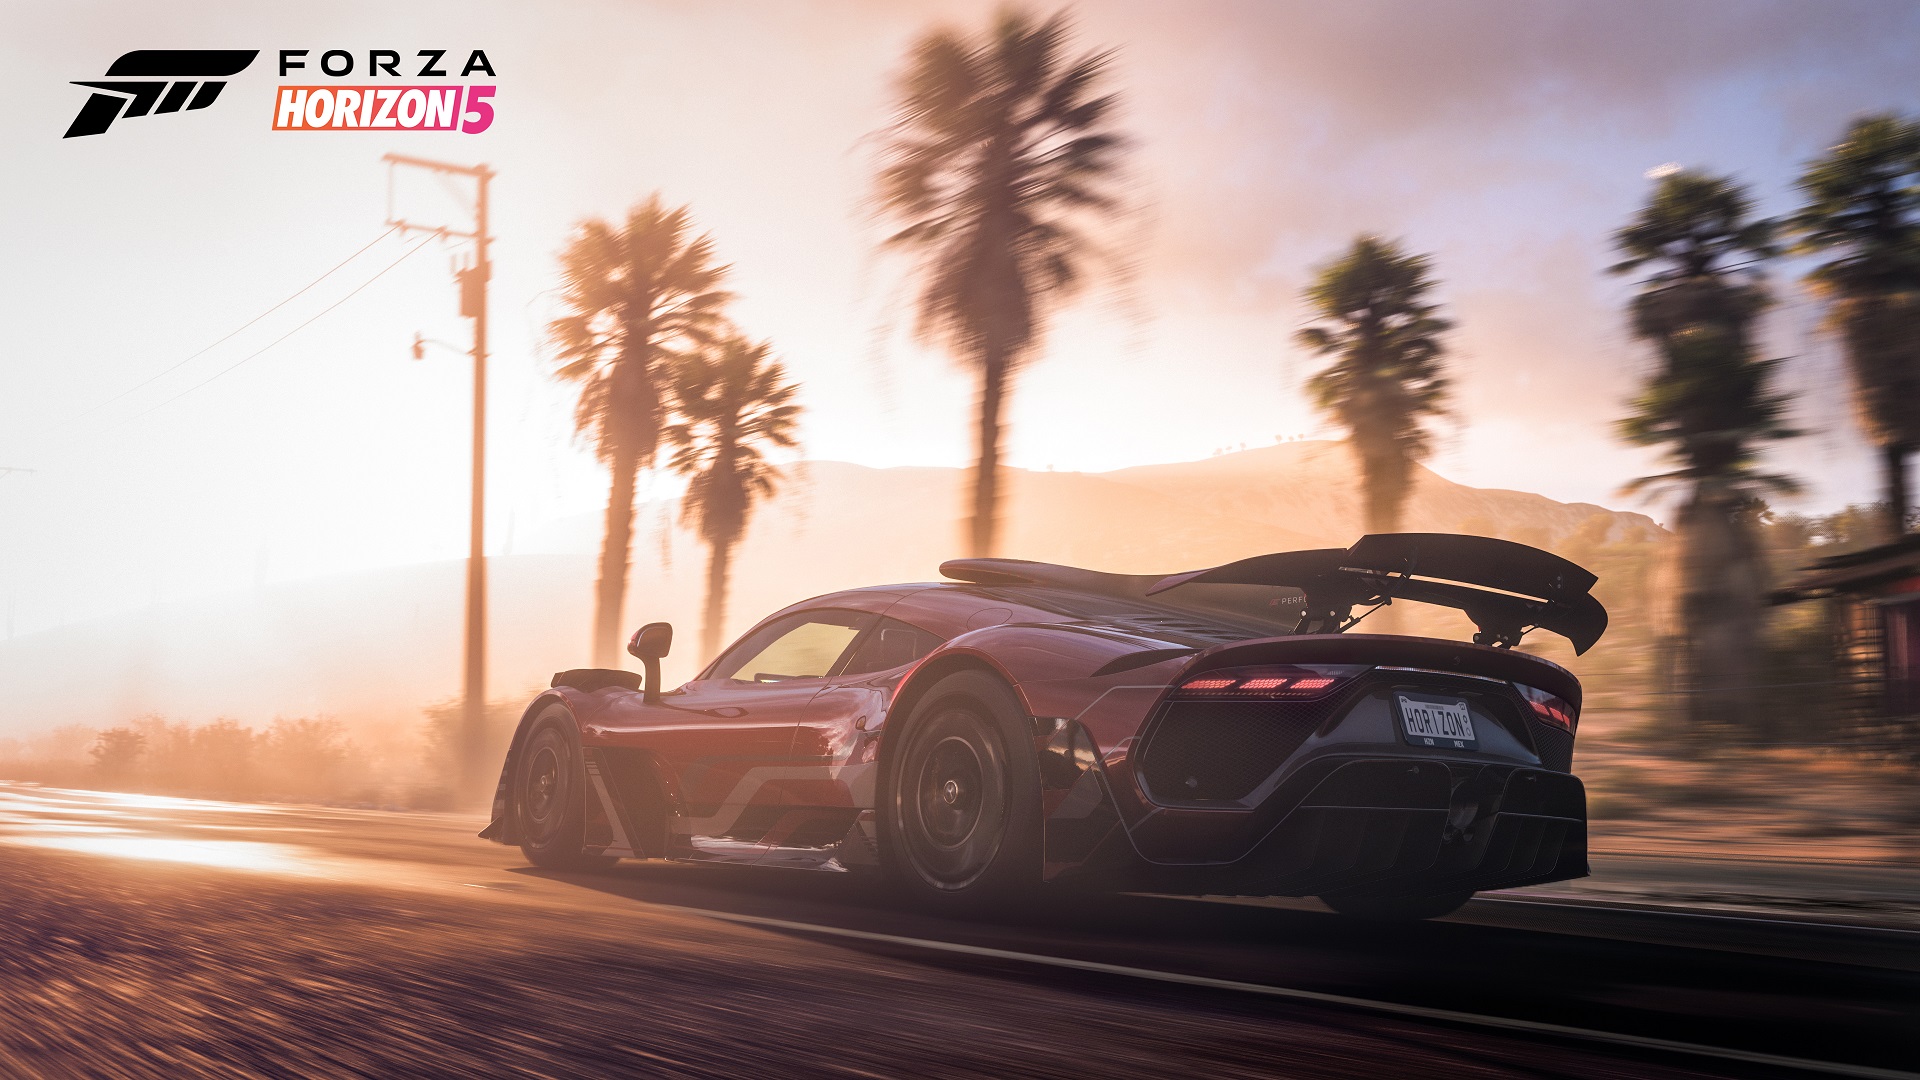 Forza Horizon 5 features “largest, most diverse open world ever”